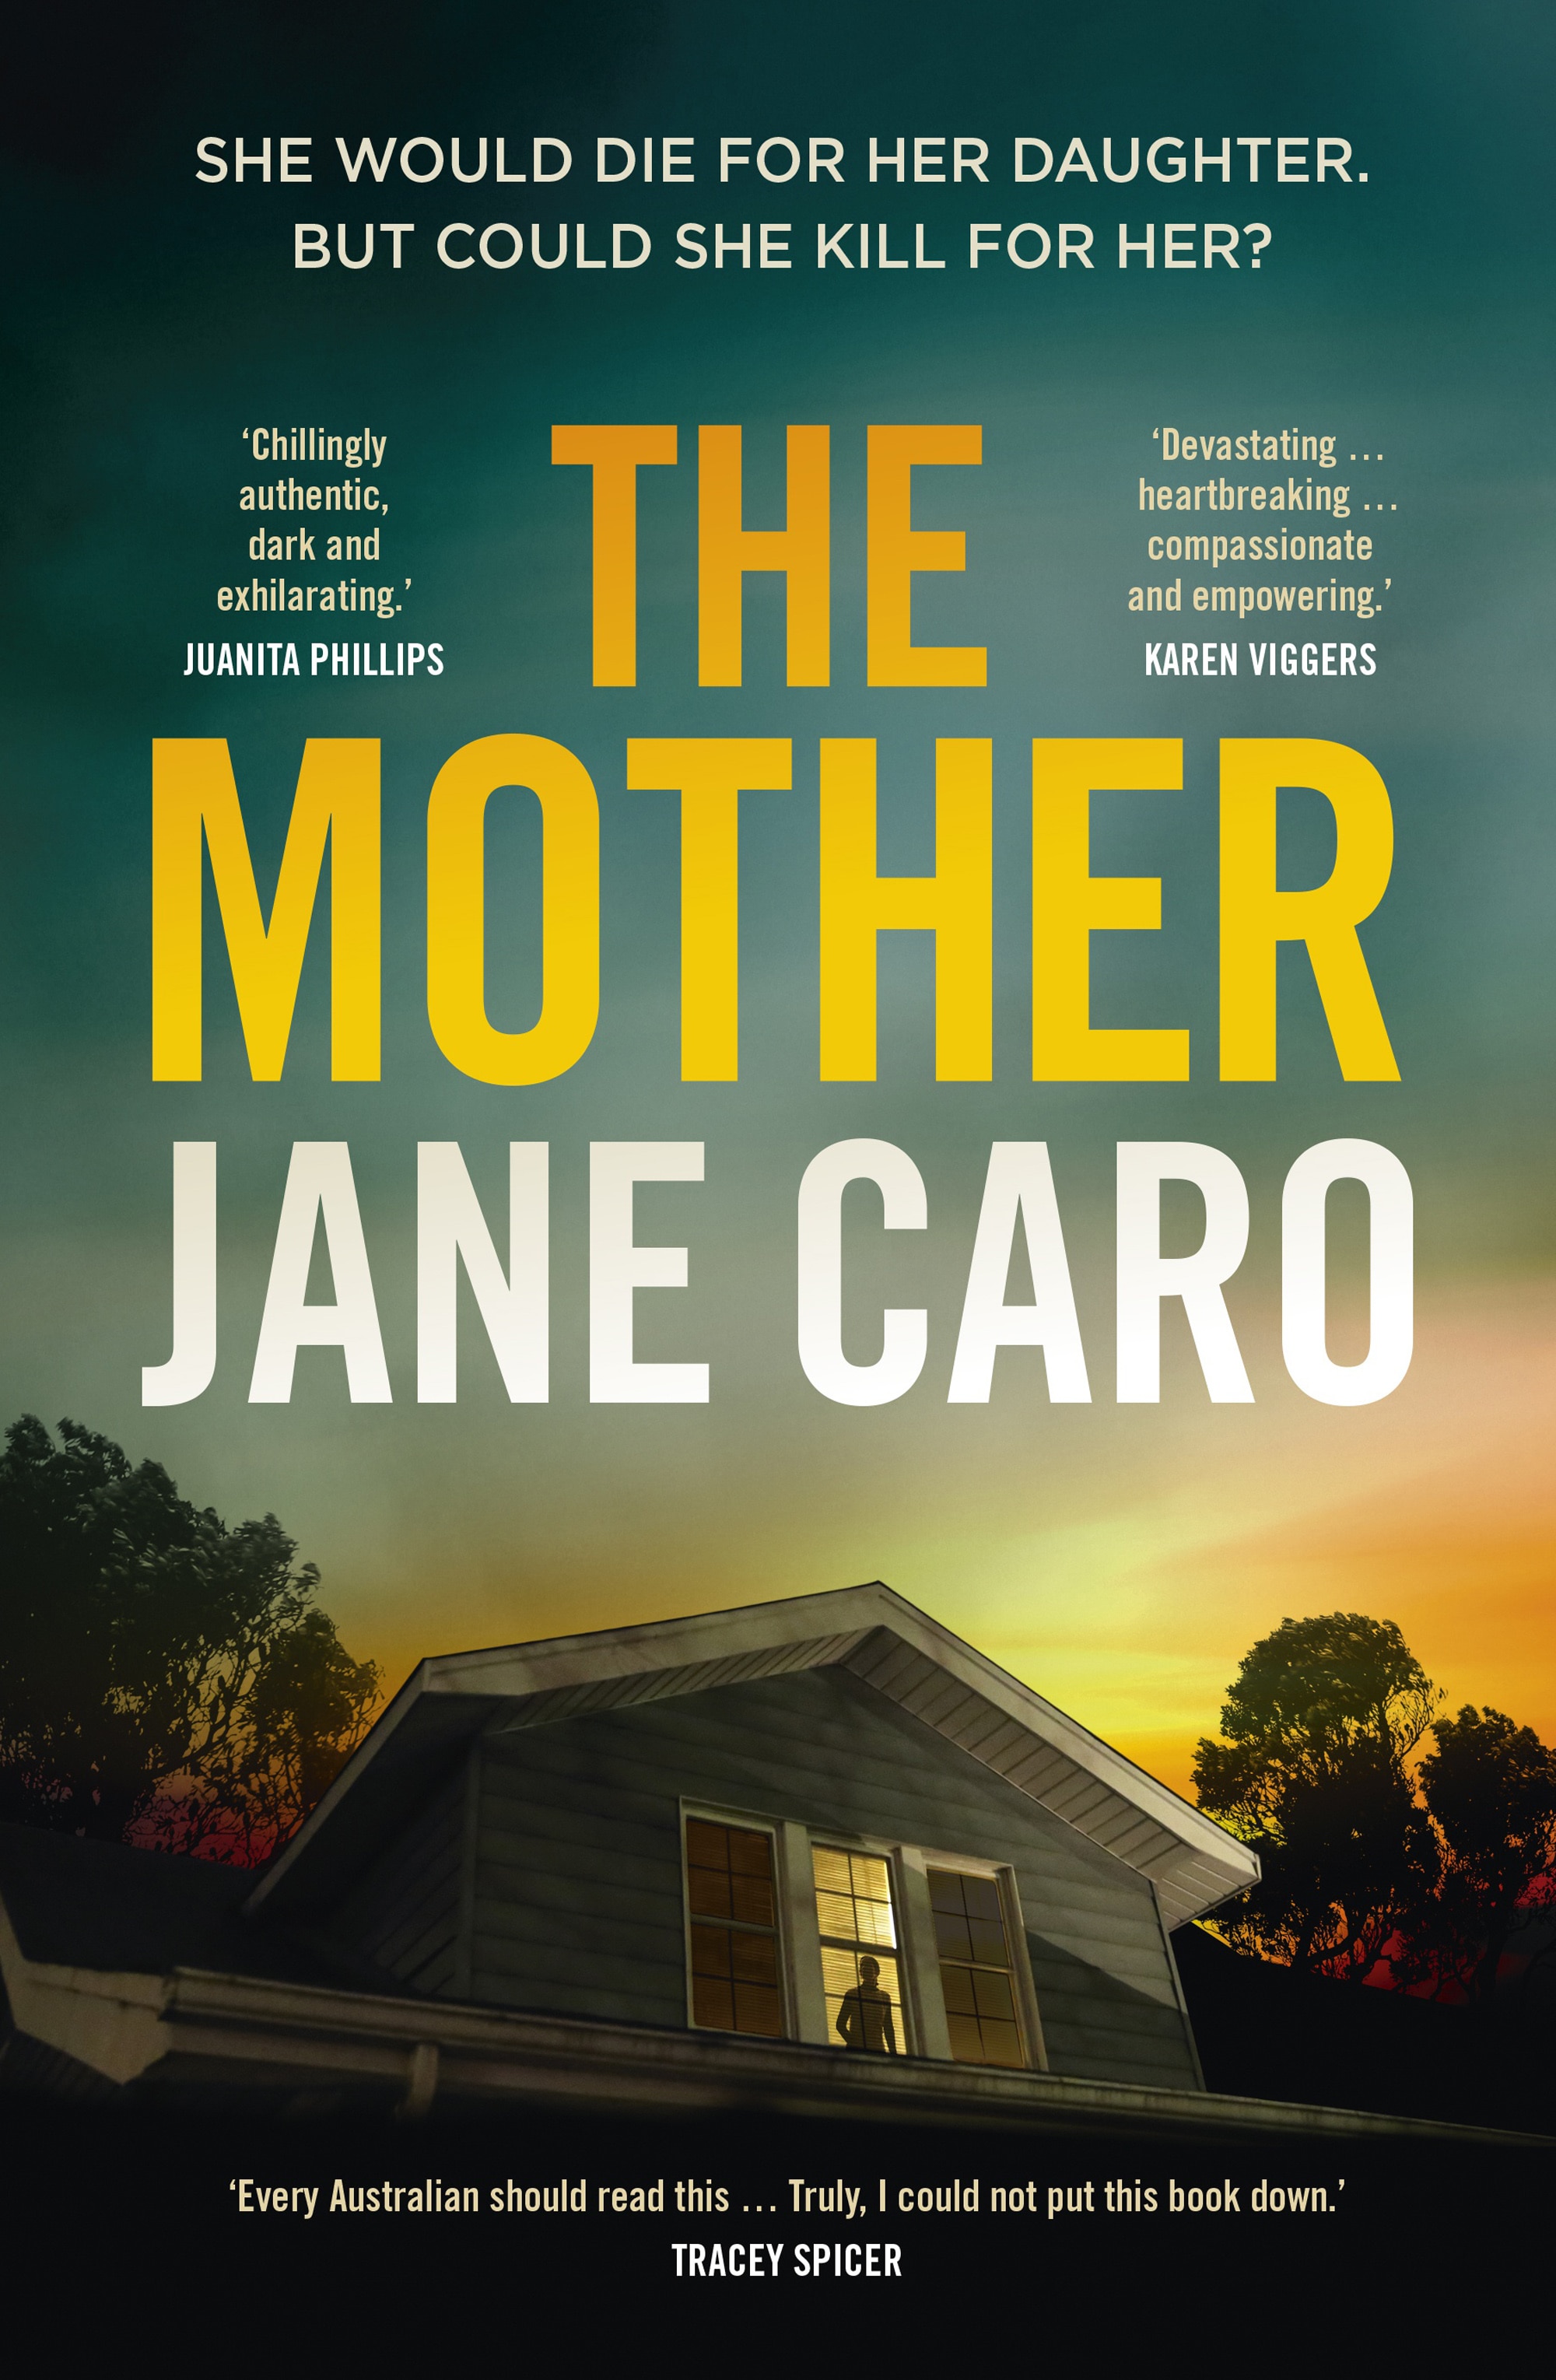 Cover of The Mother by Jane Caro, pub March 2022